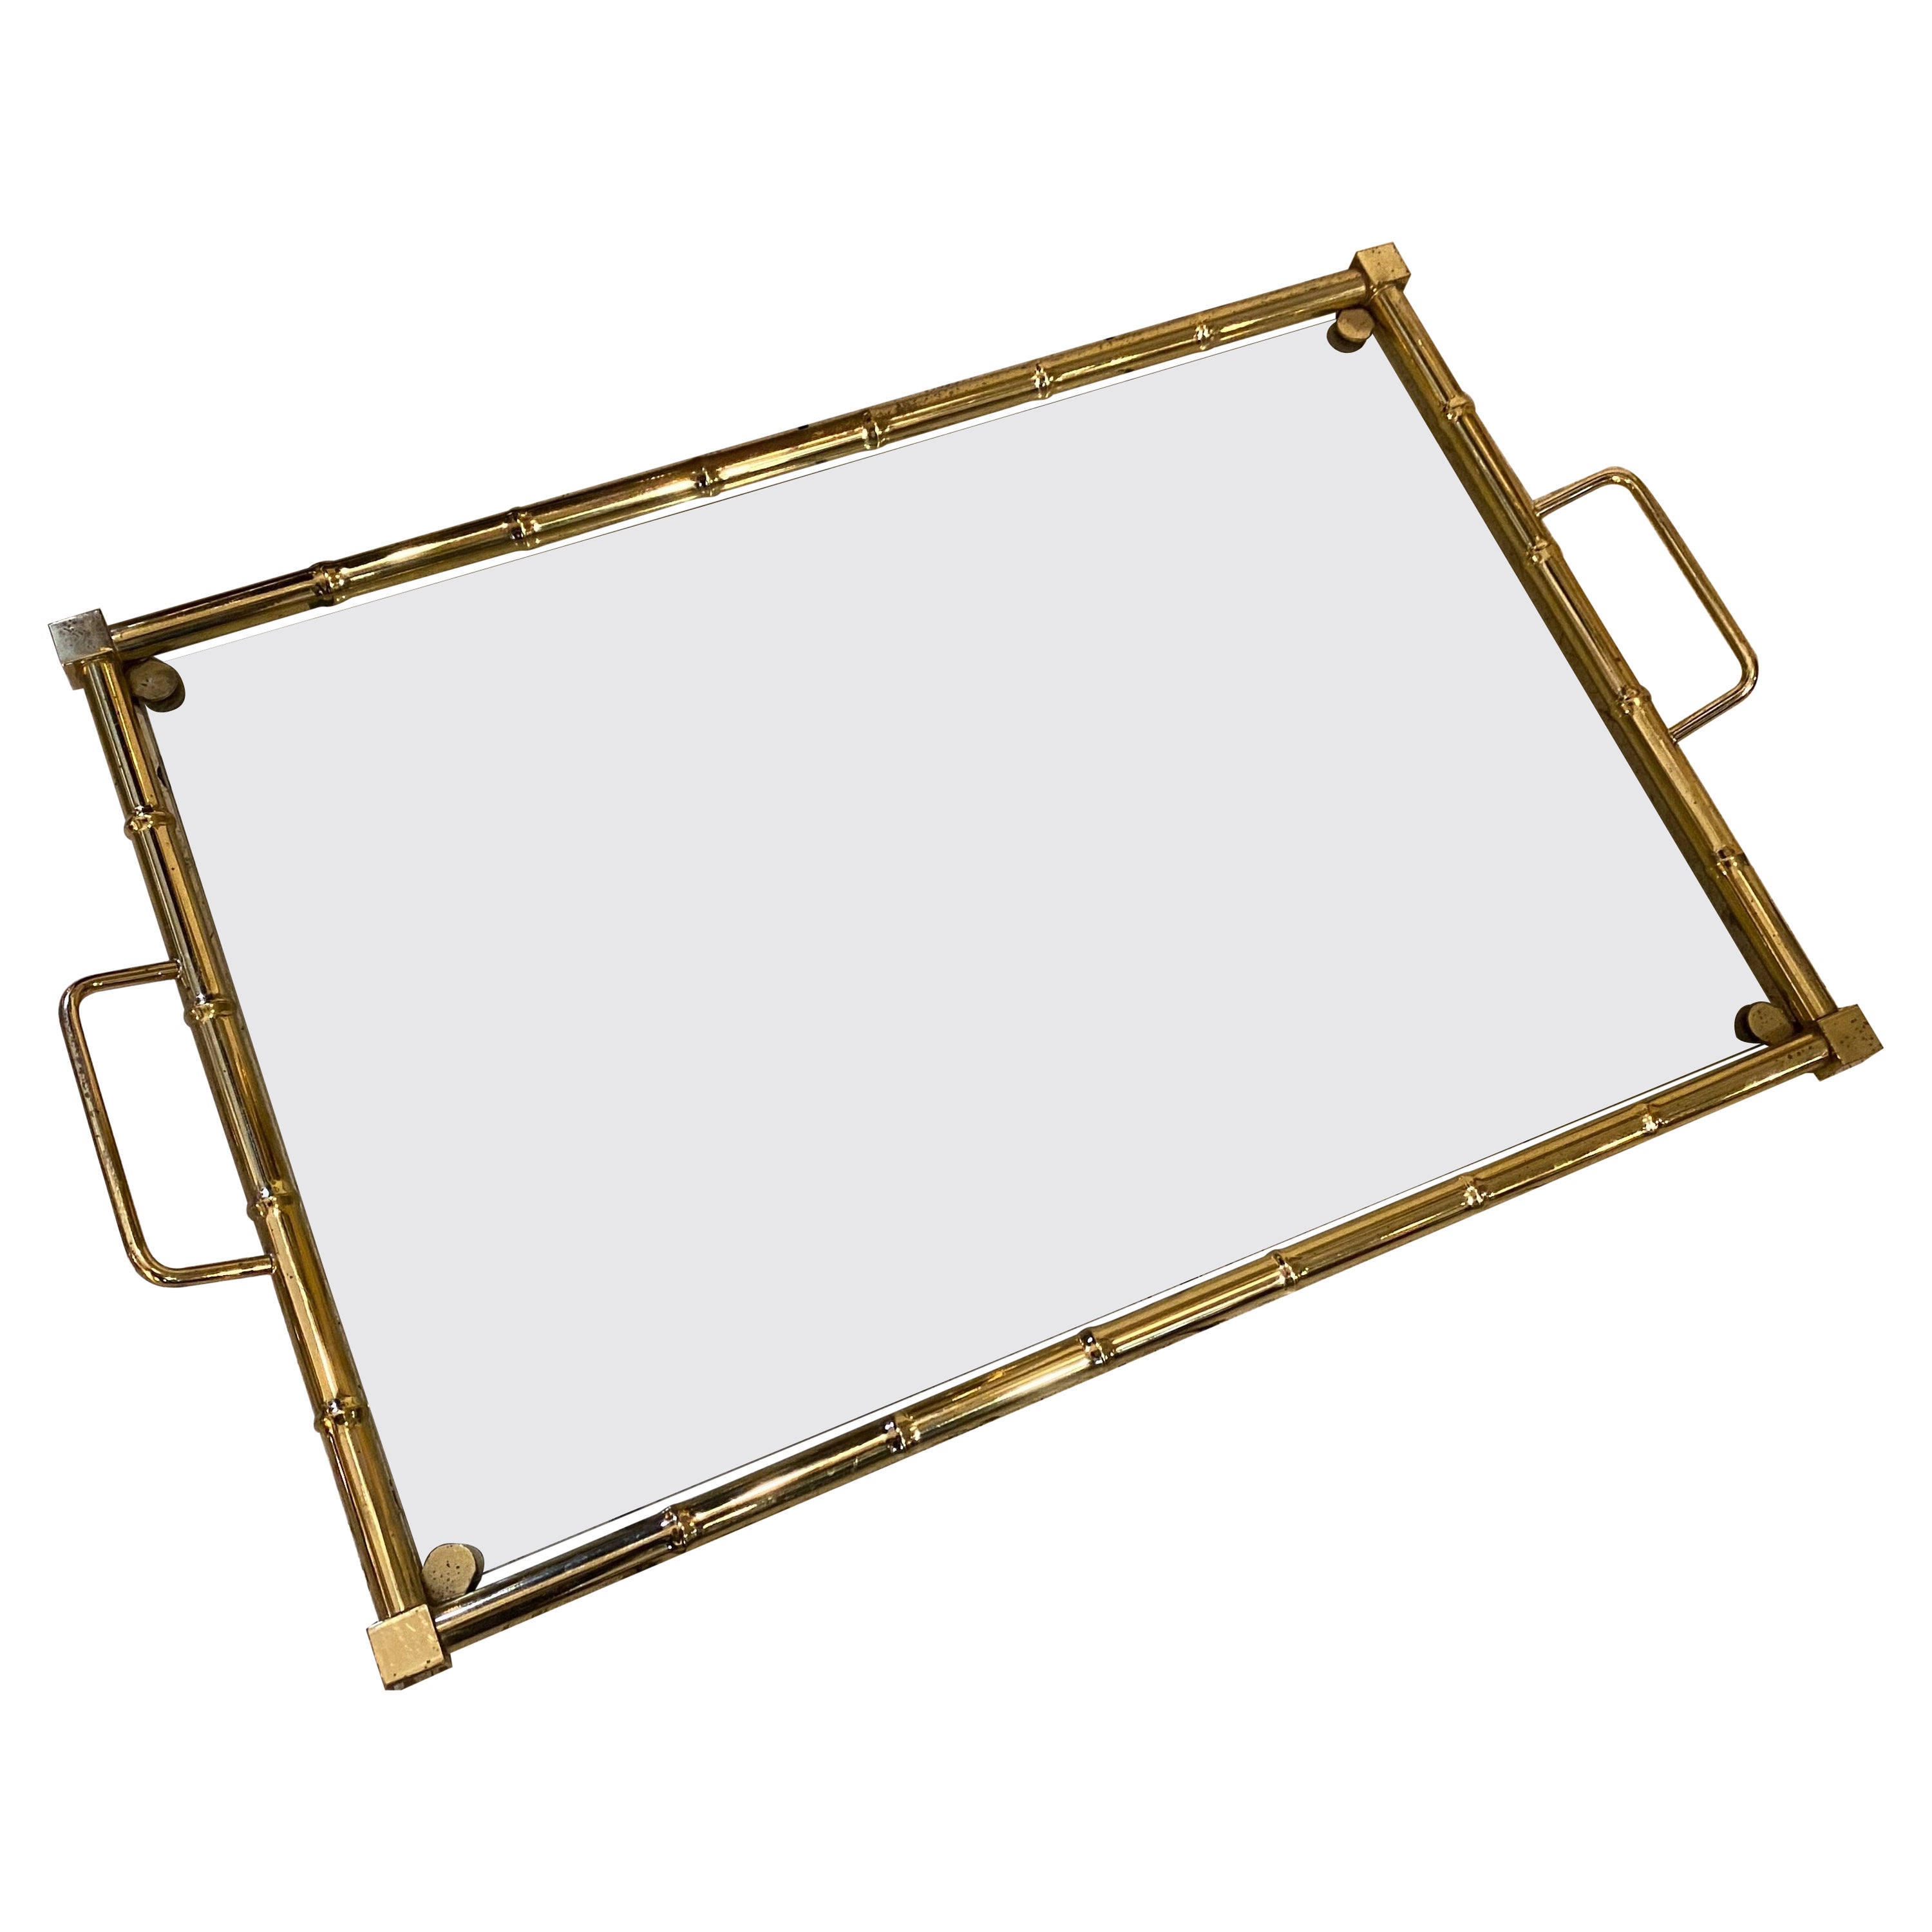 1970s Mid-Century Modern Brass and Glass Rectangular Italian Serving Tray For Sale